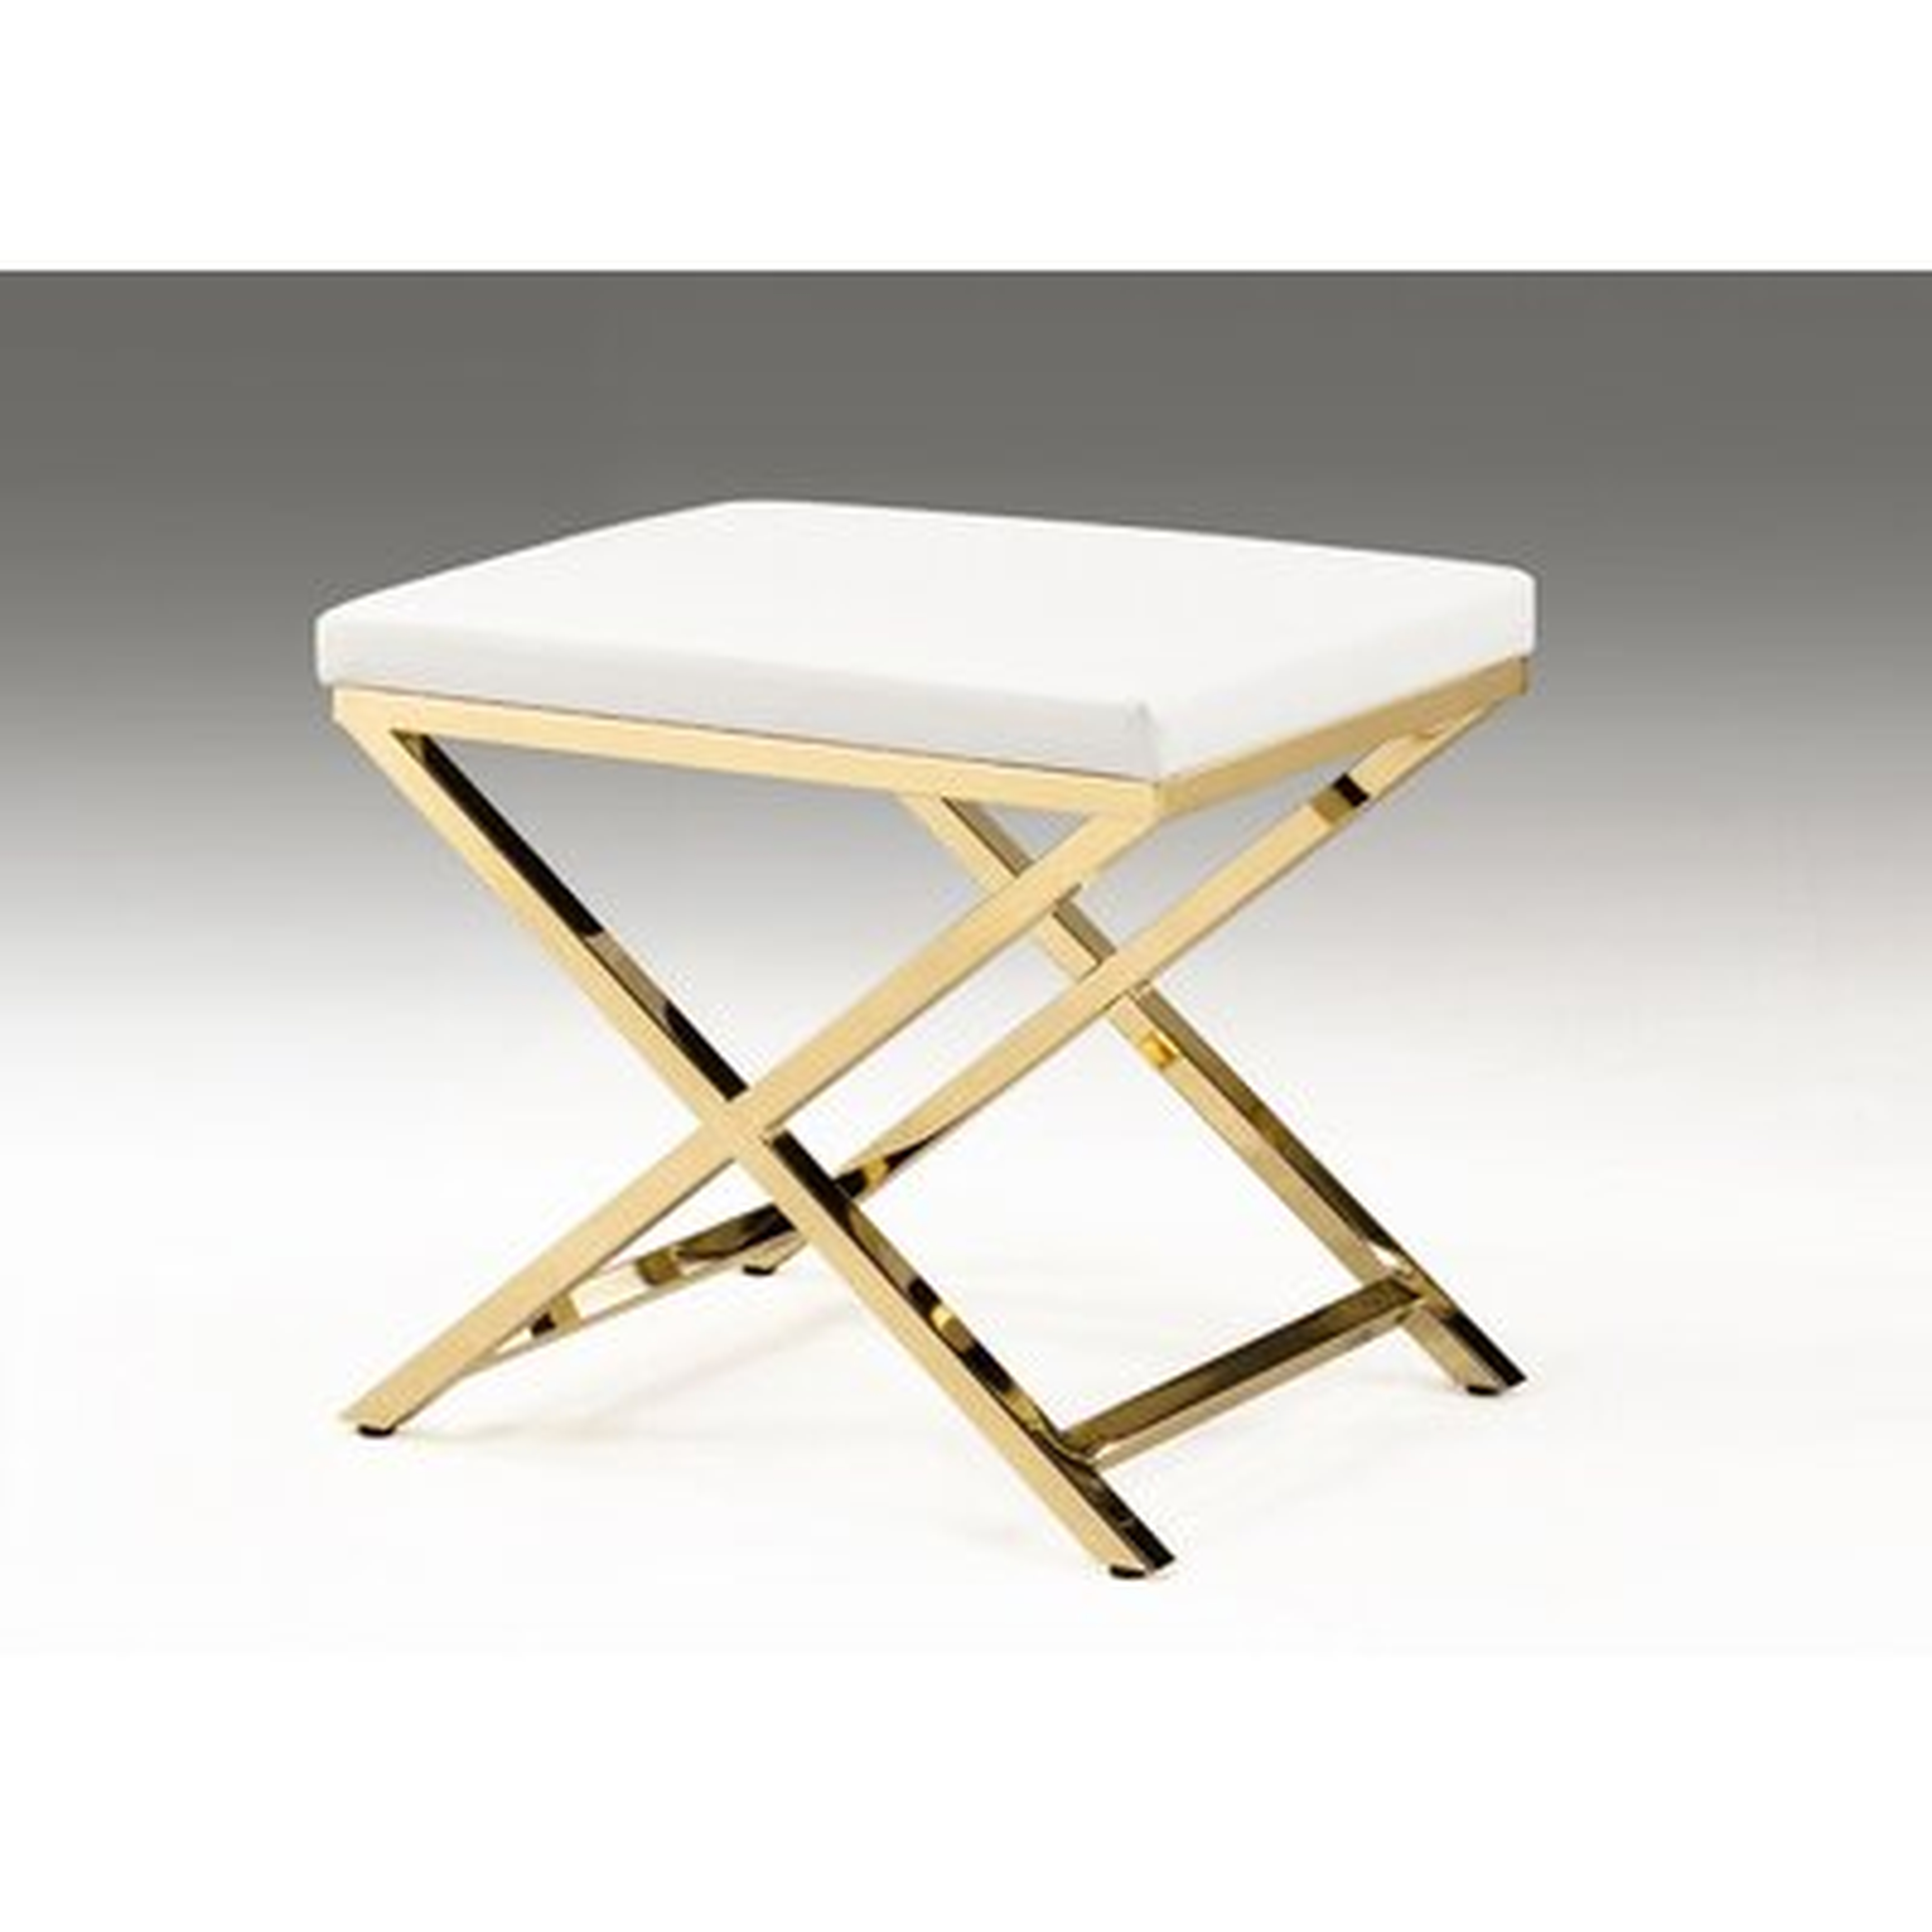 White Chair With Gold Base - Wayfair